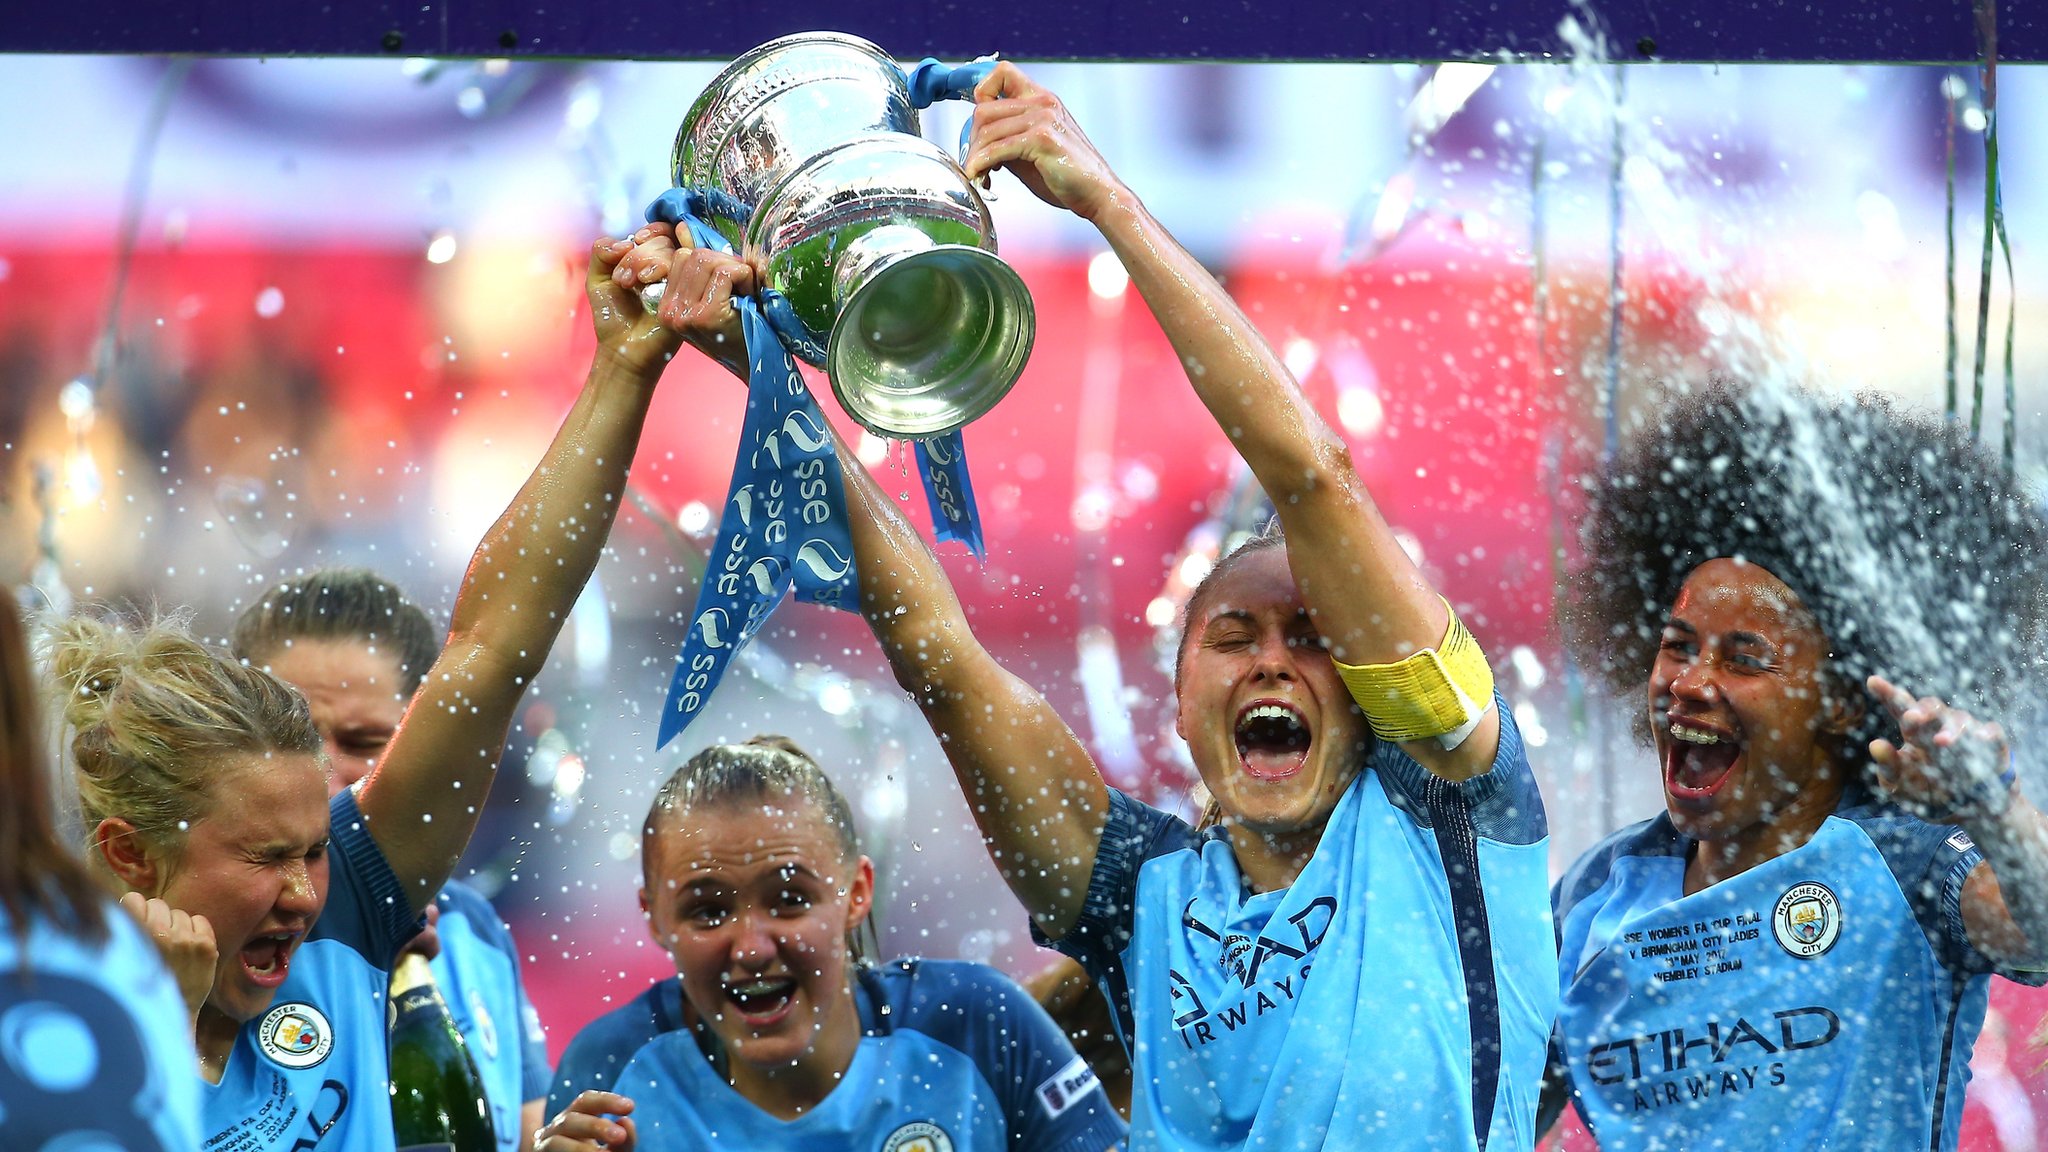 Women's FA Cup final: 40,000 tickets sold for Wembley showpiece